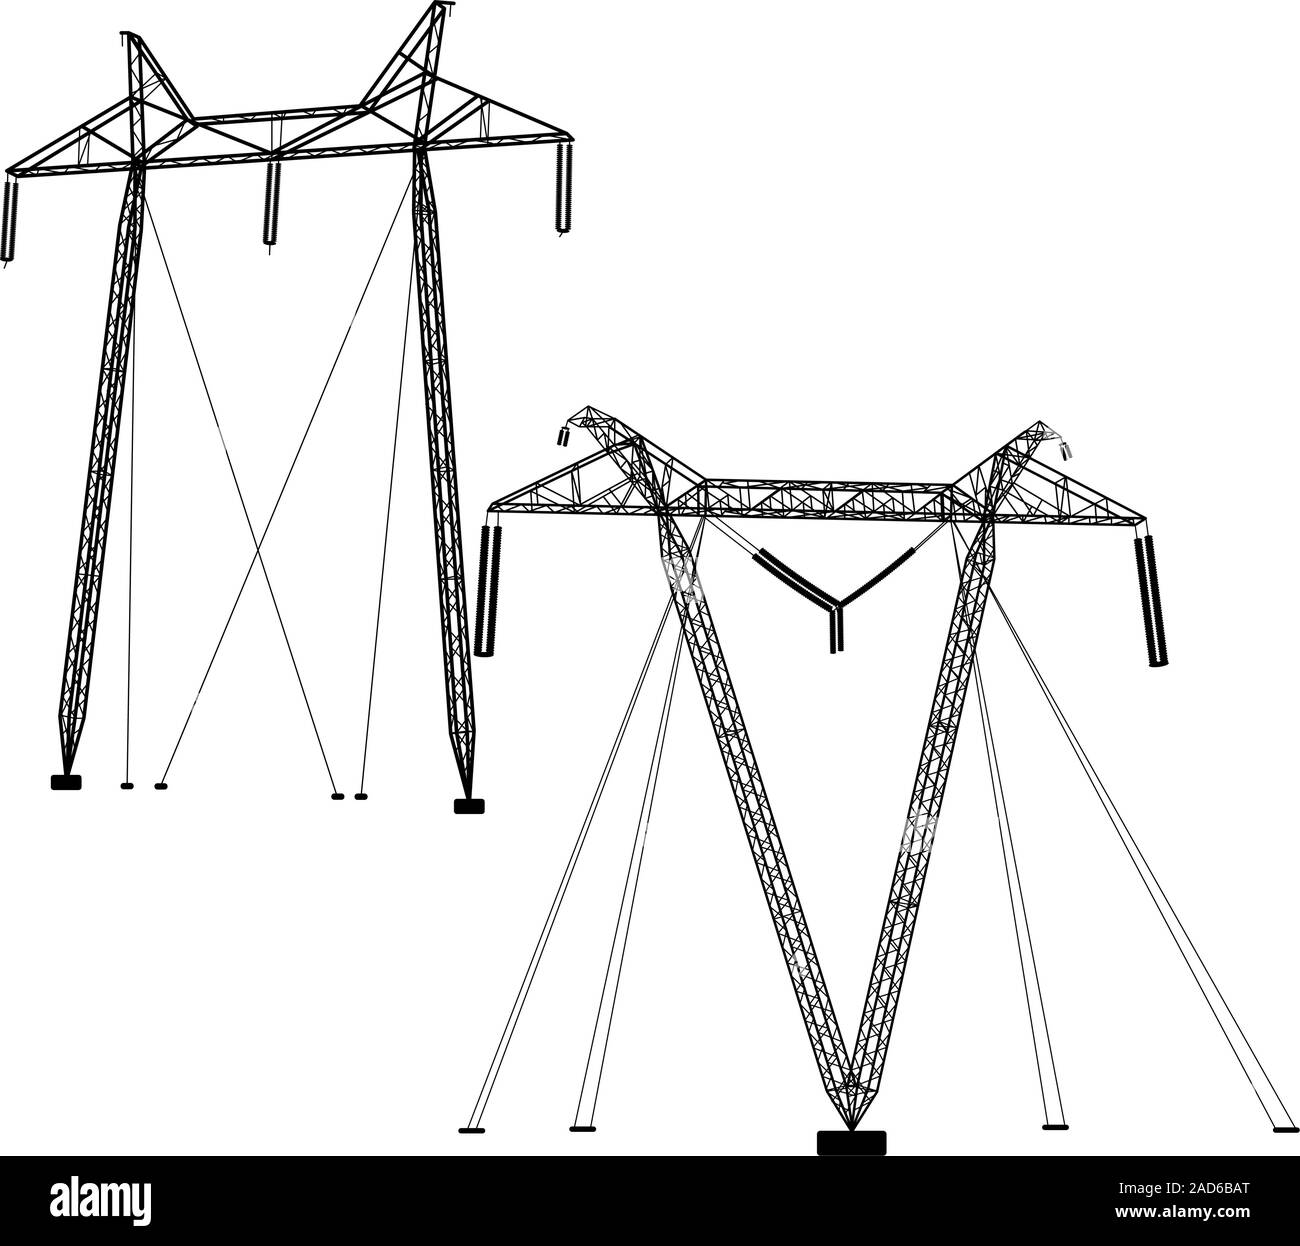 The electricity transmission power lines. Vector illustration. Stock Vector